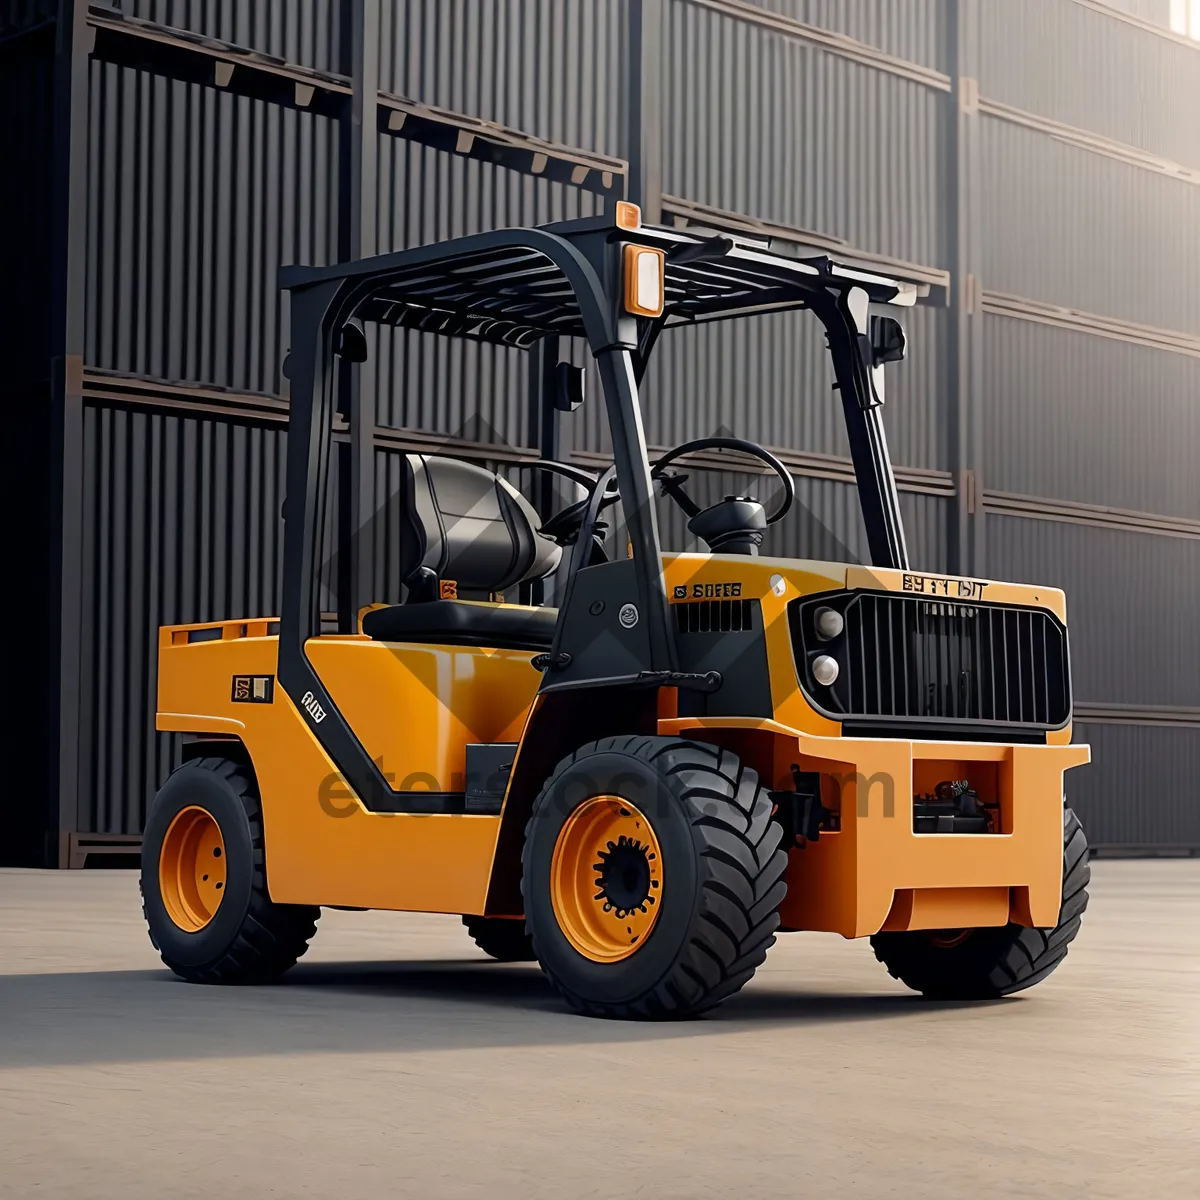 Picture of Heavy-duty Forklift delivering cargo in warehouse